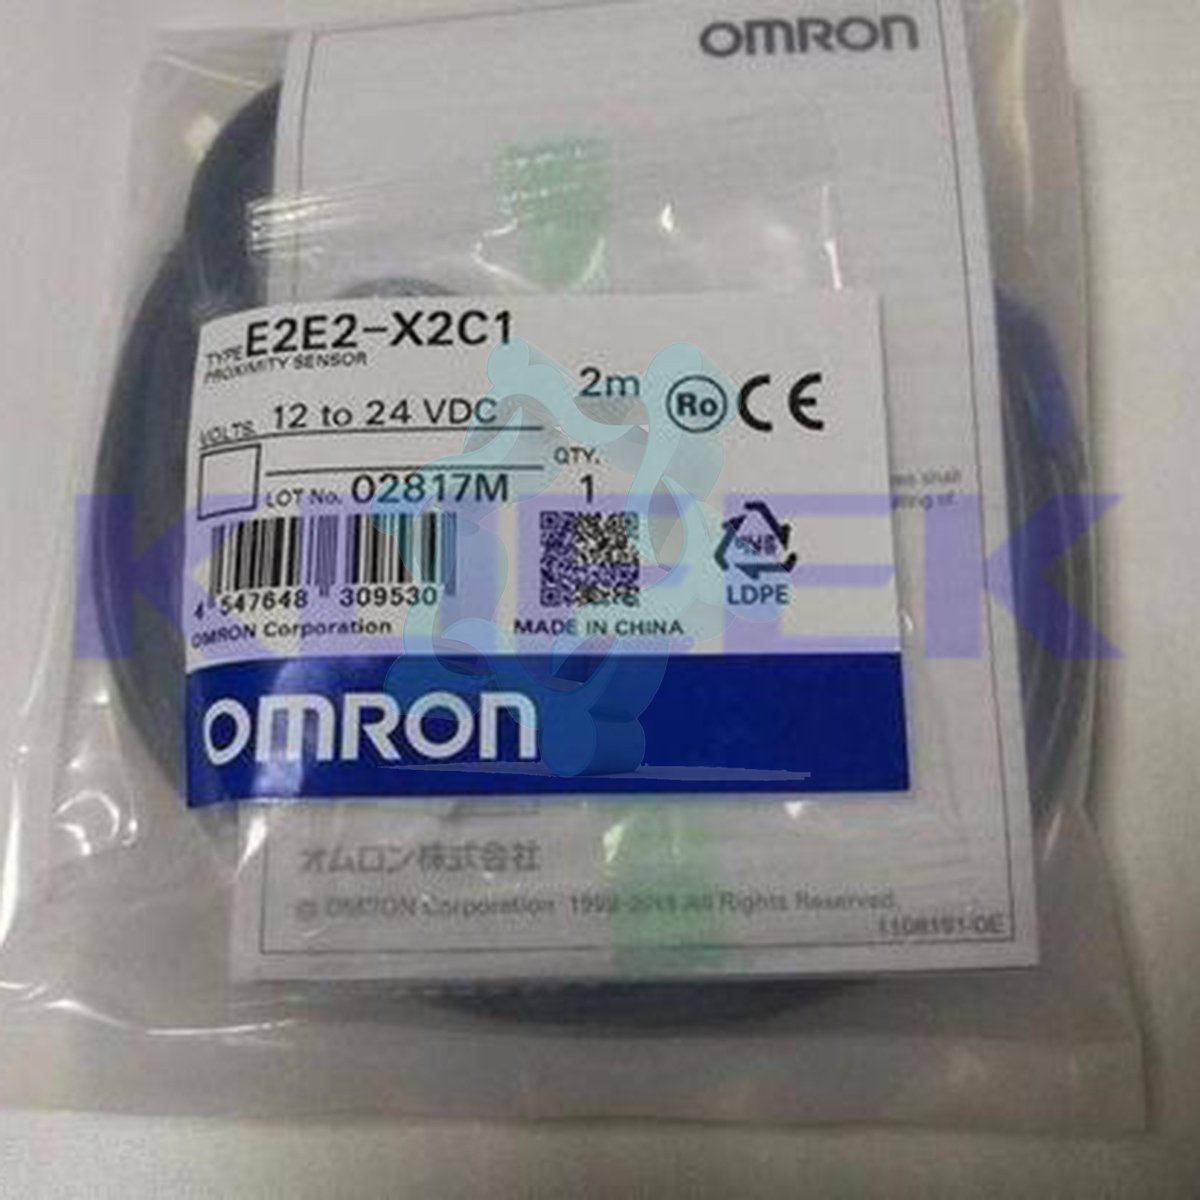 E2E2-X2C1 KOEED 101-200, 80%, import_2020_10_10_031751, Omron, Other